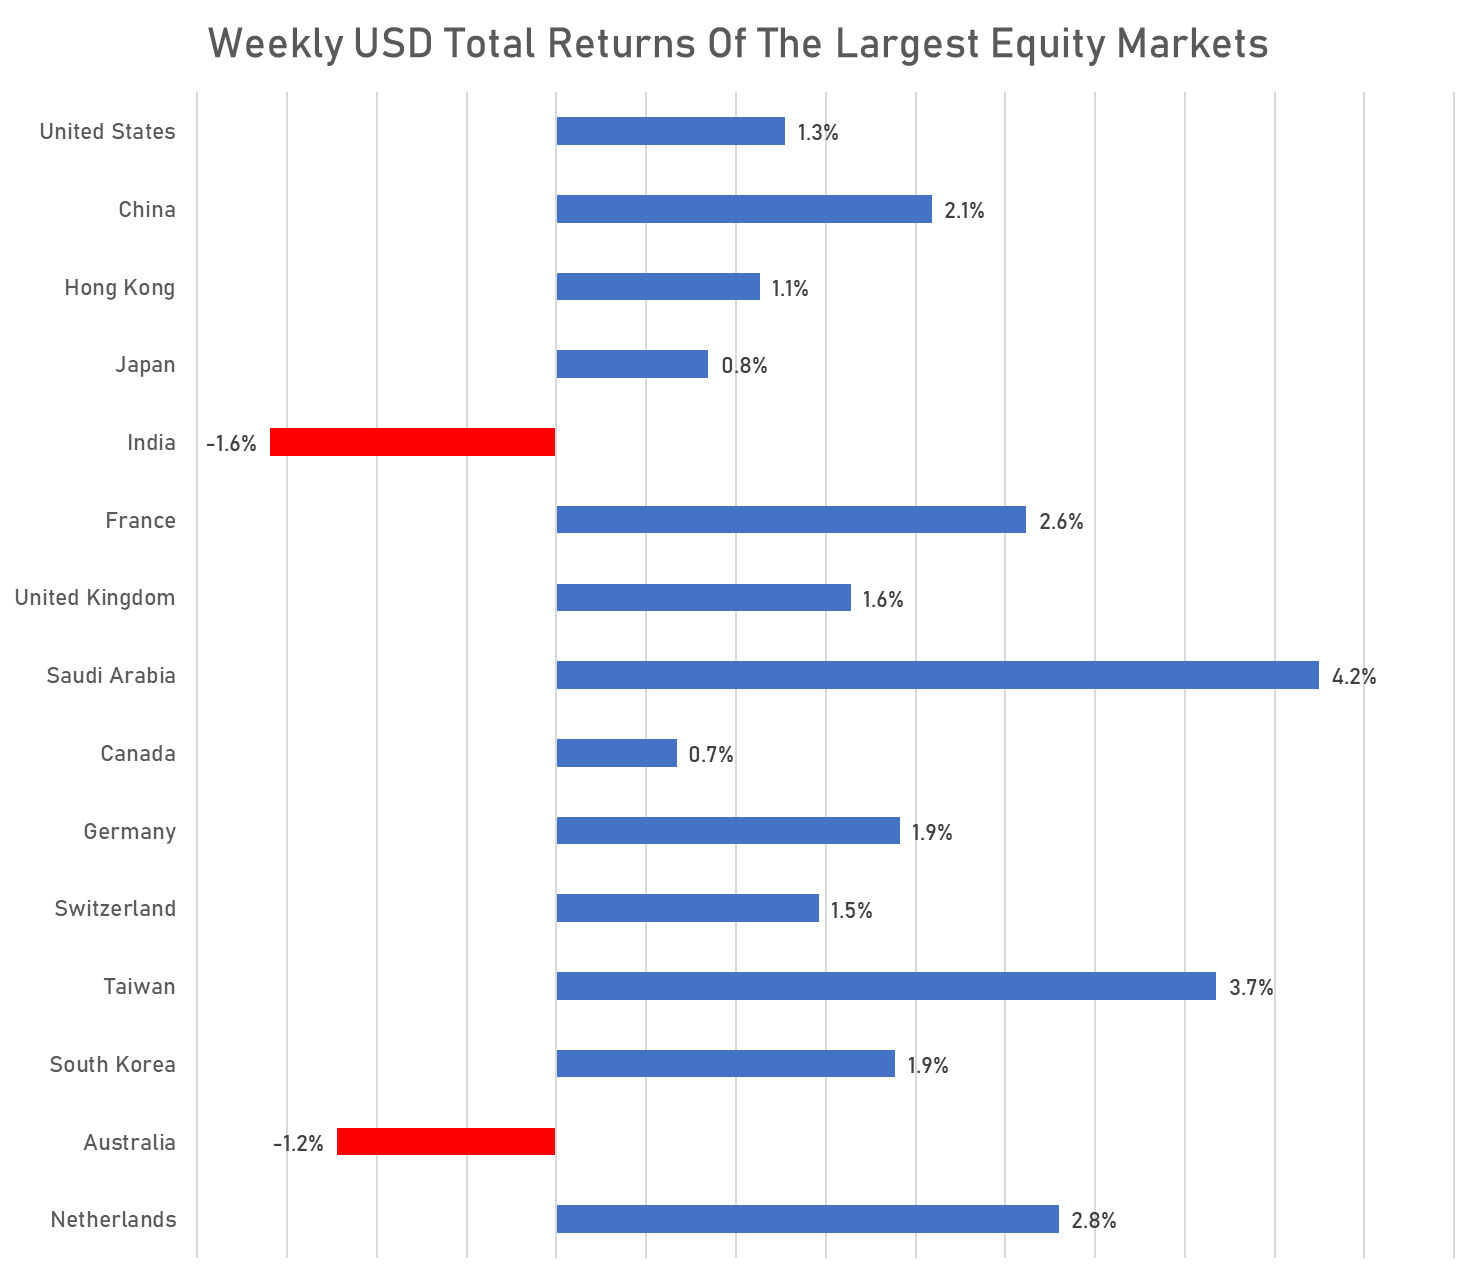 Weekly USD Total Returns for Global equity markets | Sources: phipost.com, FactSet data